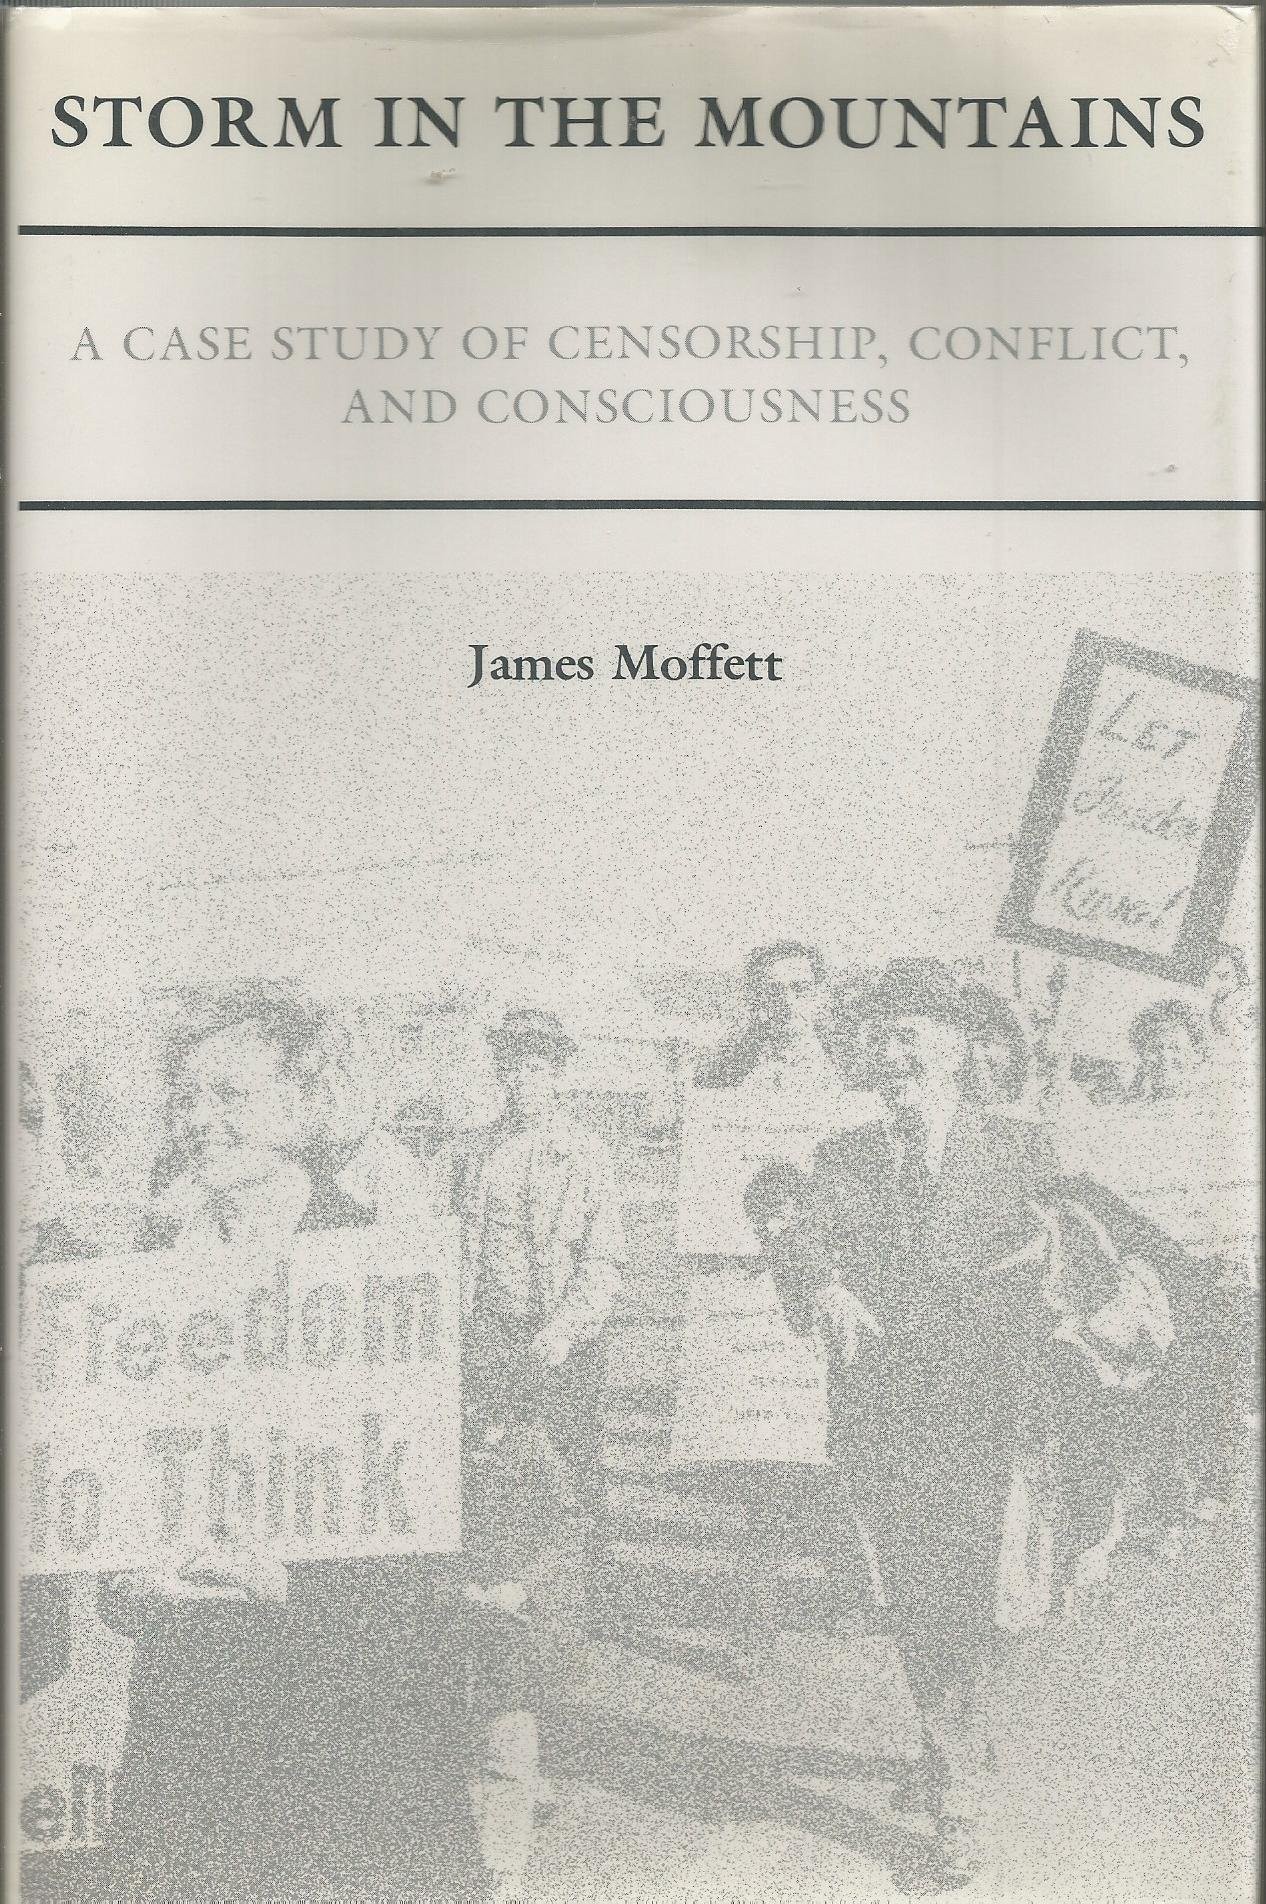 Storm in the Mountains: A Case Study of Censorship, Conflict, and Consciousness